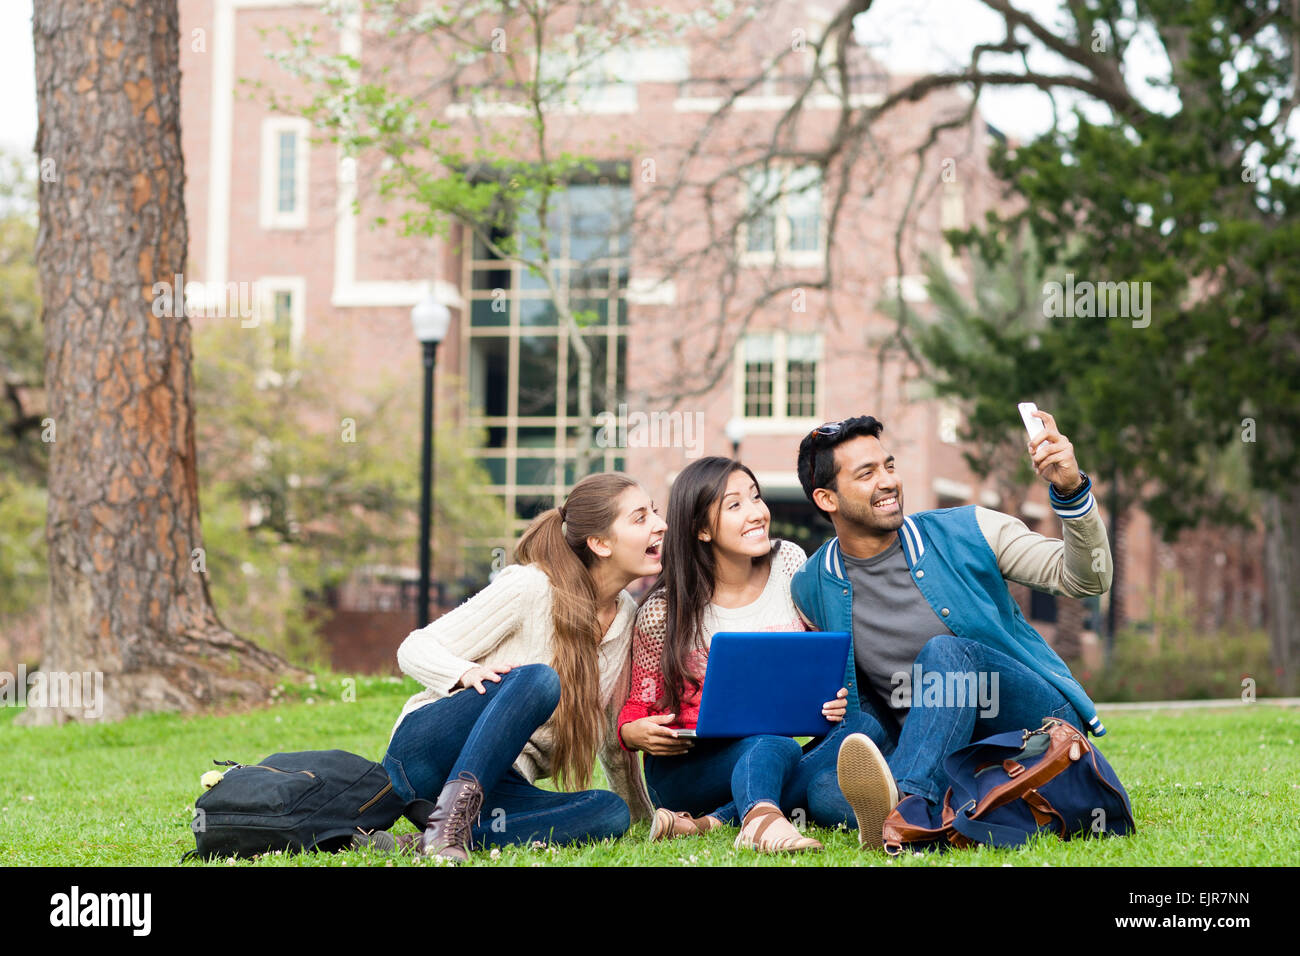 Students taking cell phone photograph on campus Stock Photo